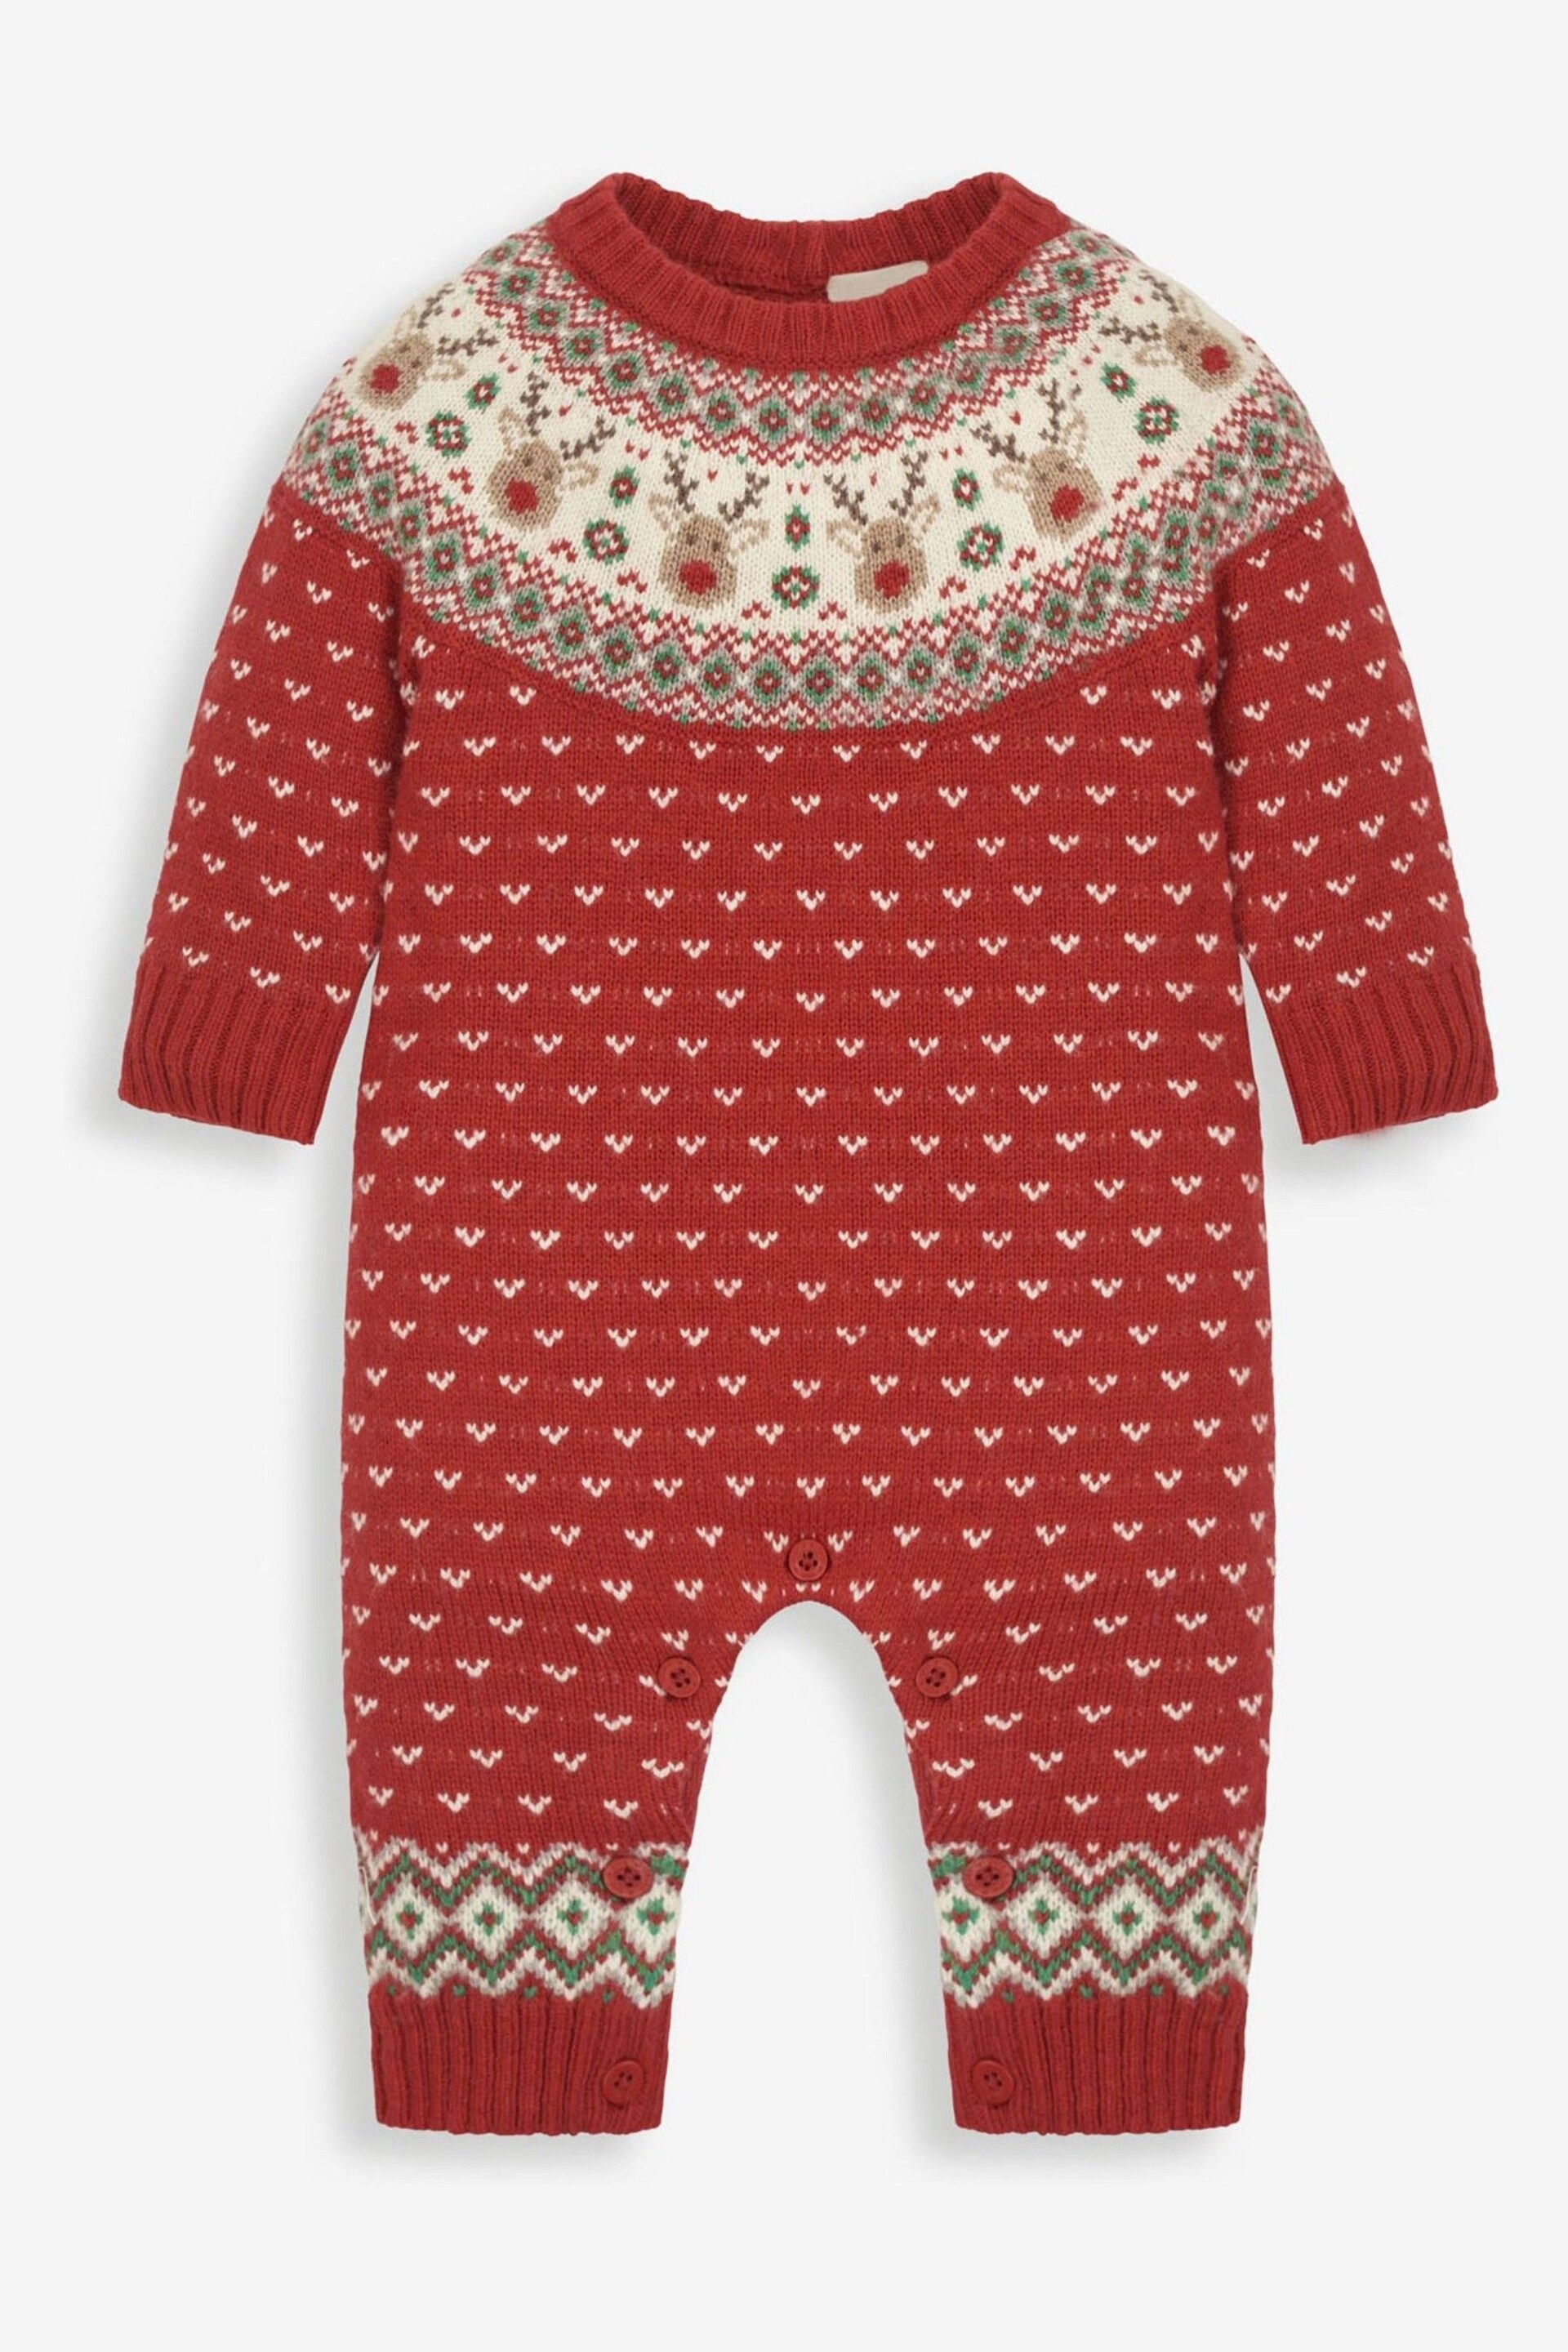 JoJo Maman Bébé Red Reindeer Fair Isle Knitted Baby All-In-One - Image 3 of 4